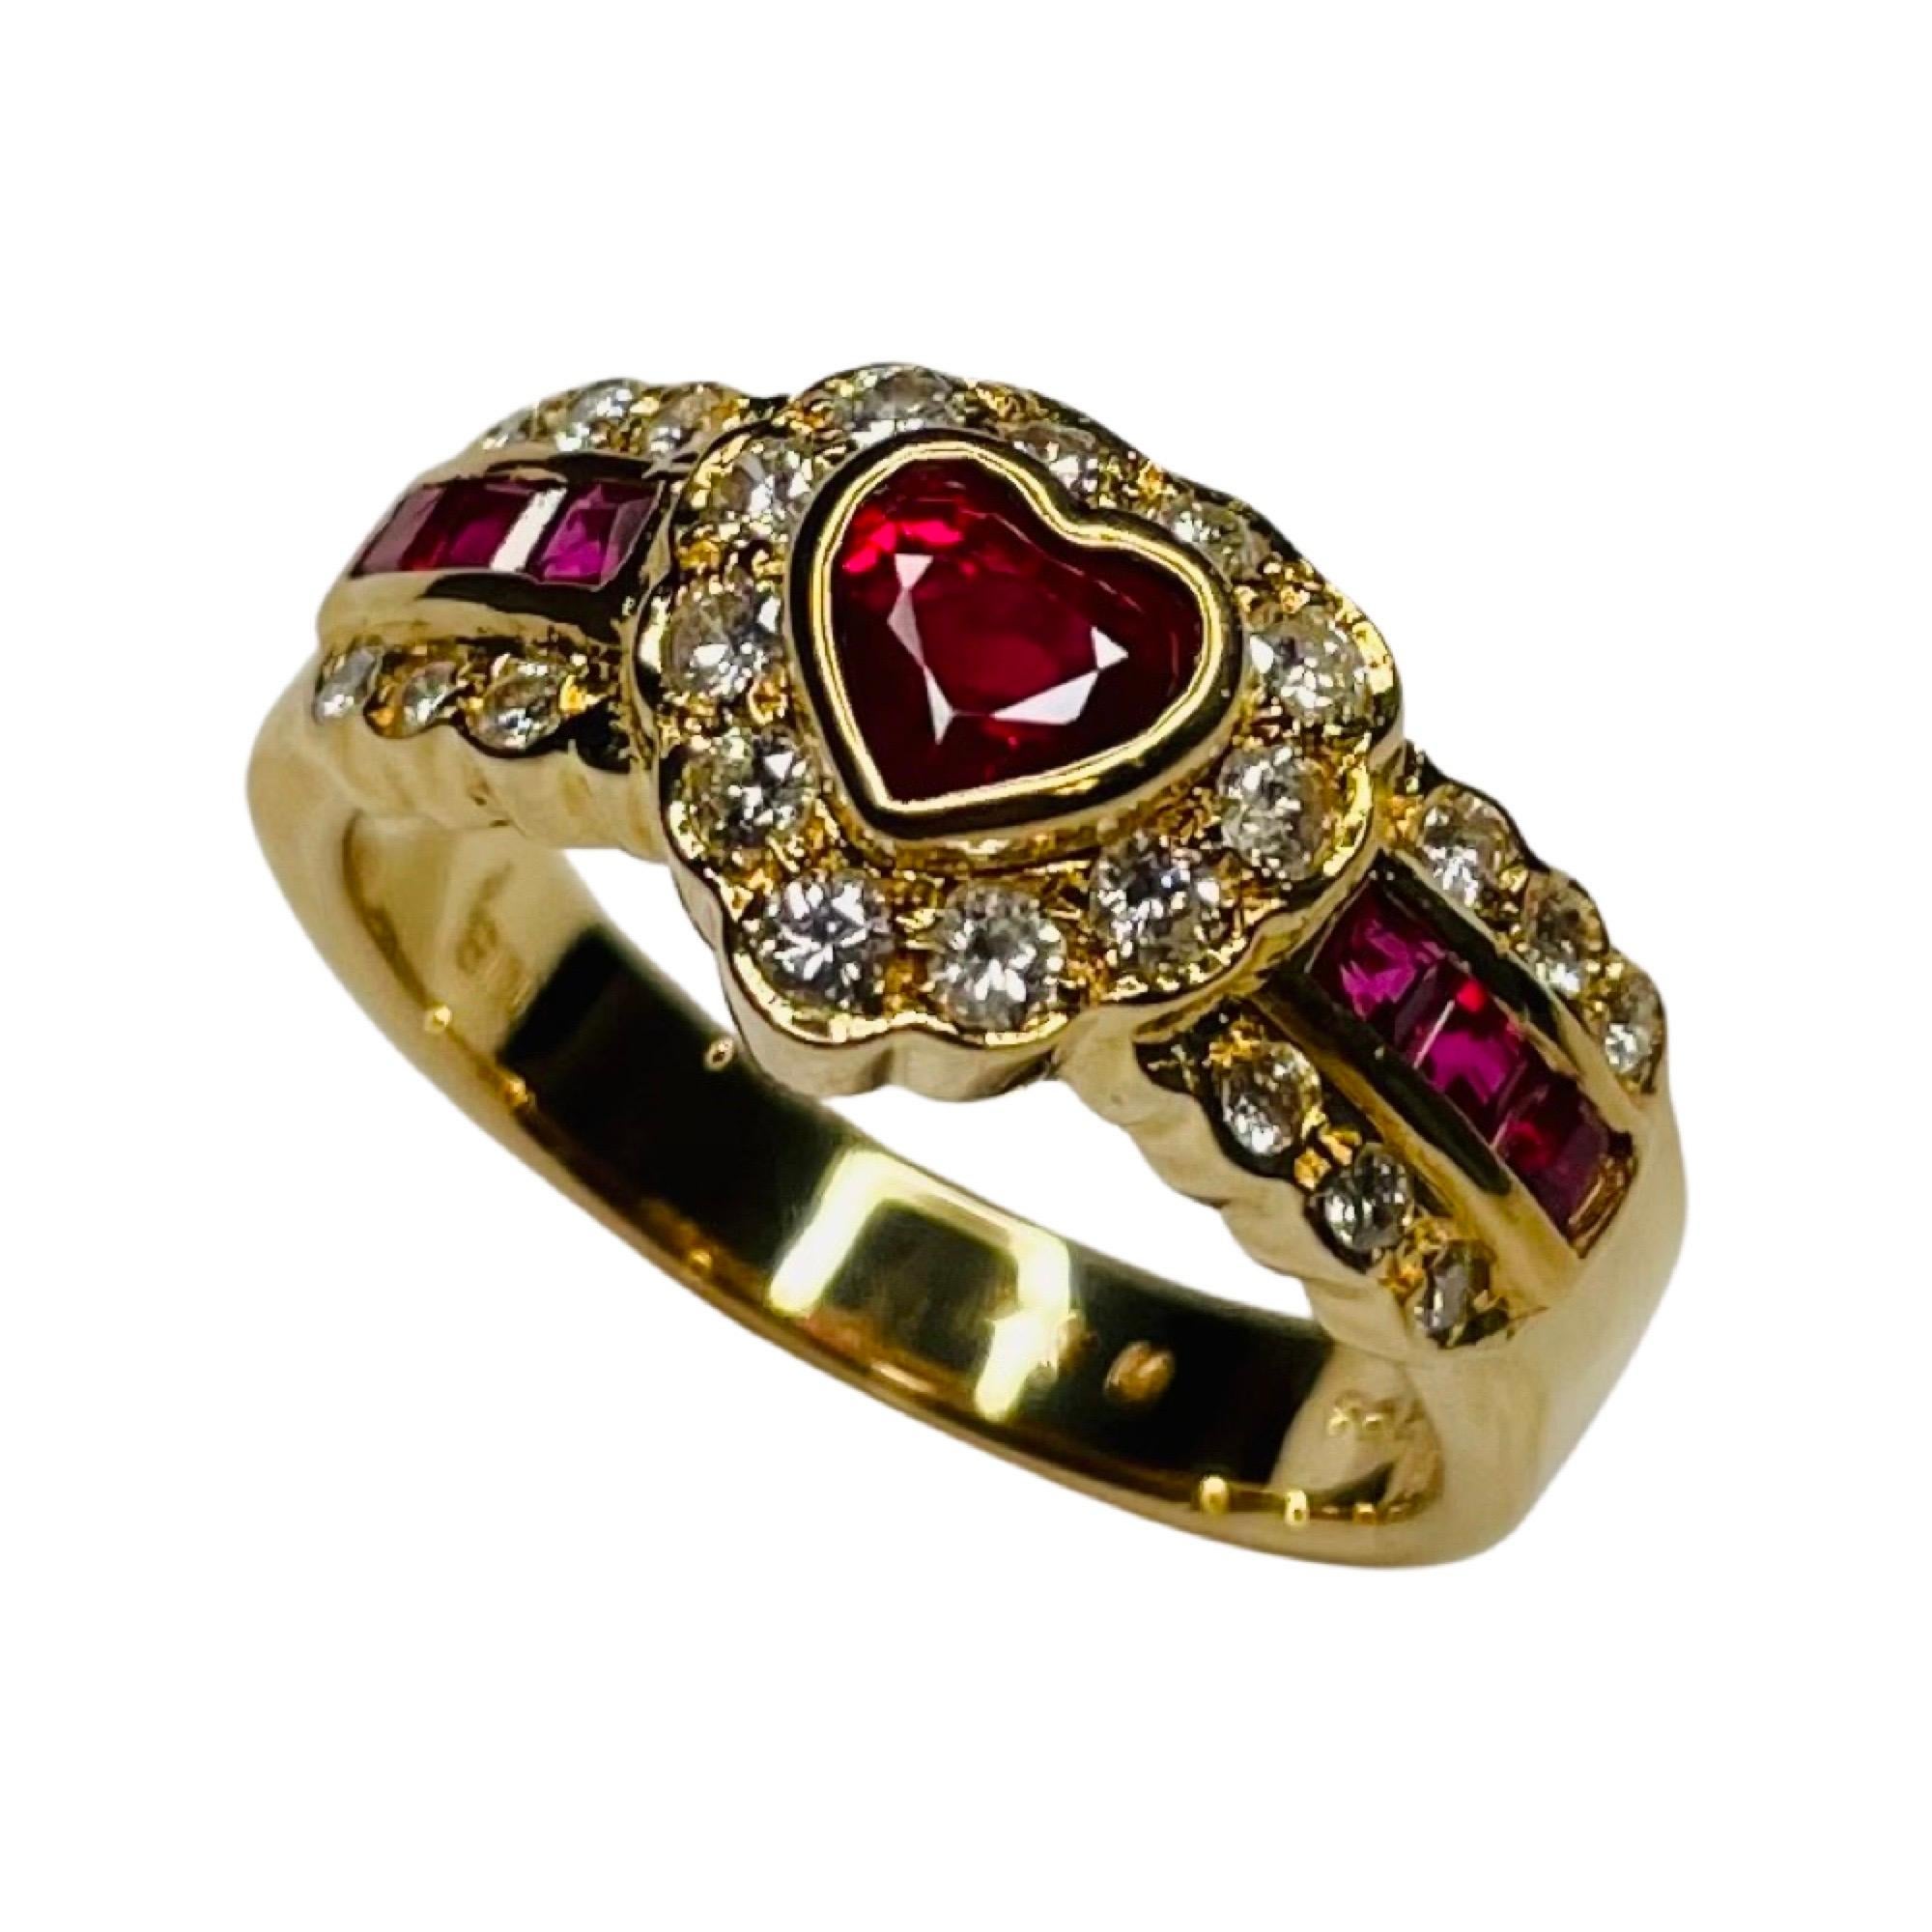 Bogo 18K Yellow Gold Diamond and Ruby Heart Shaped Ring. The natural Ruby is 9.5 mm x 9.75 mm.  It is bezel set, weighing 0.53 carats. The side rubies are square cut and channel set and weigh 0.31 carats. There is a total ruby weight of 0.84 carats.